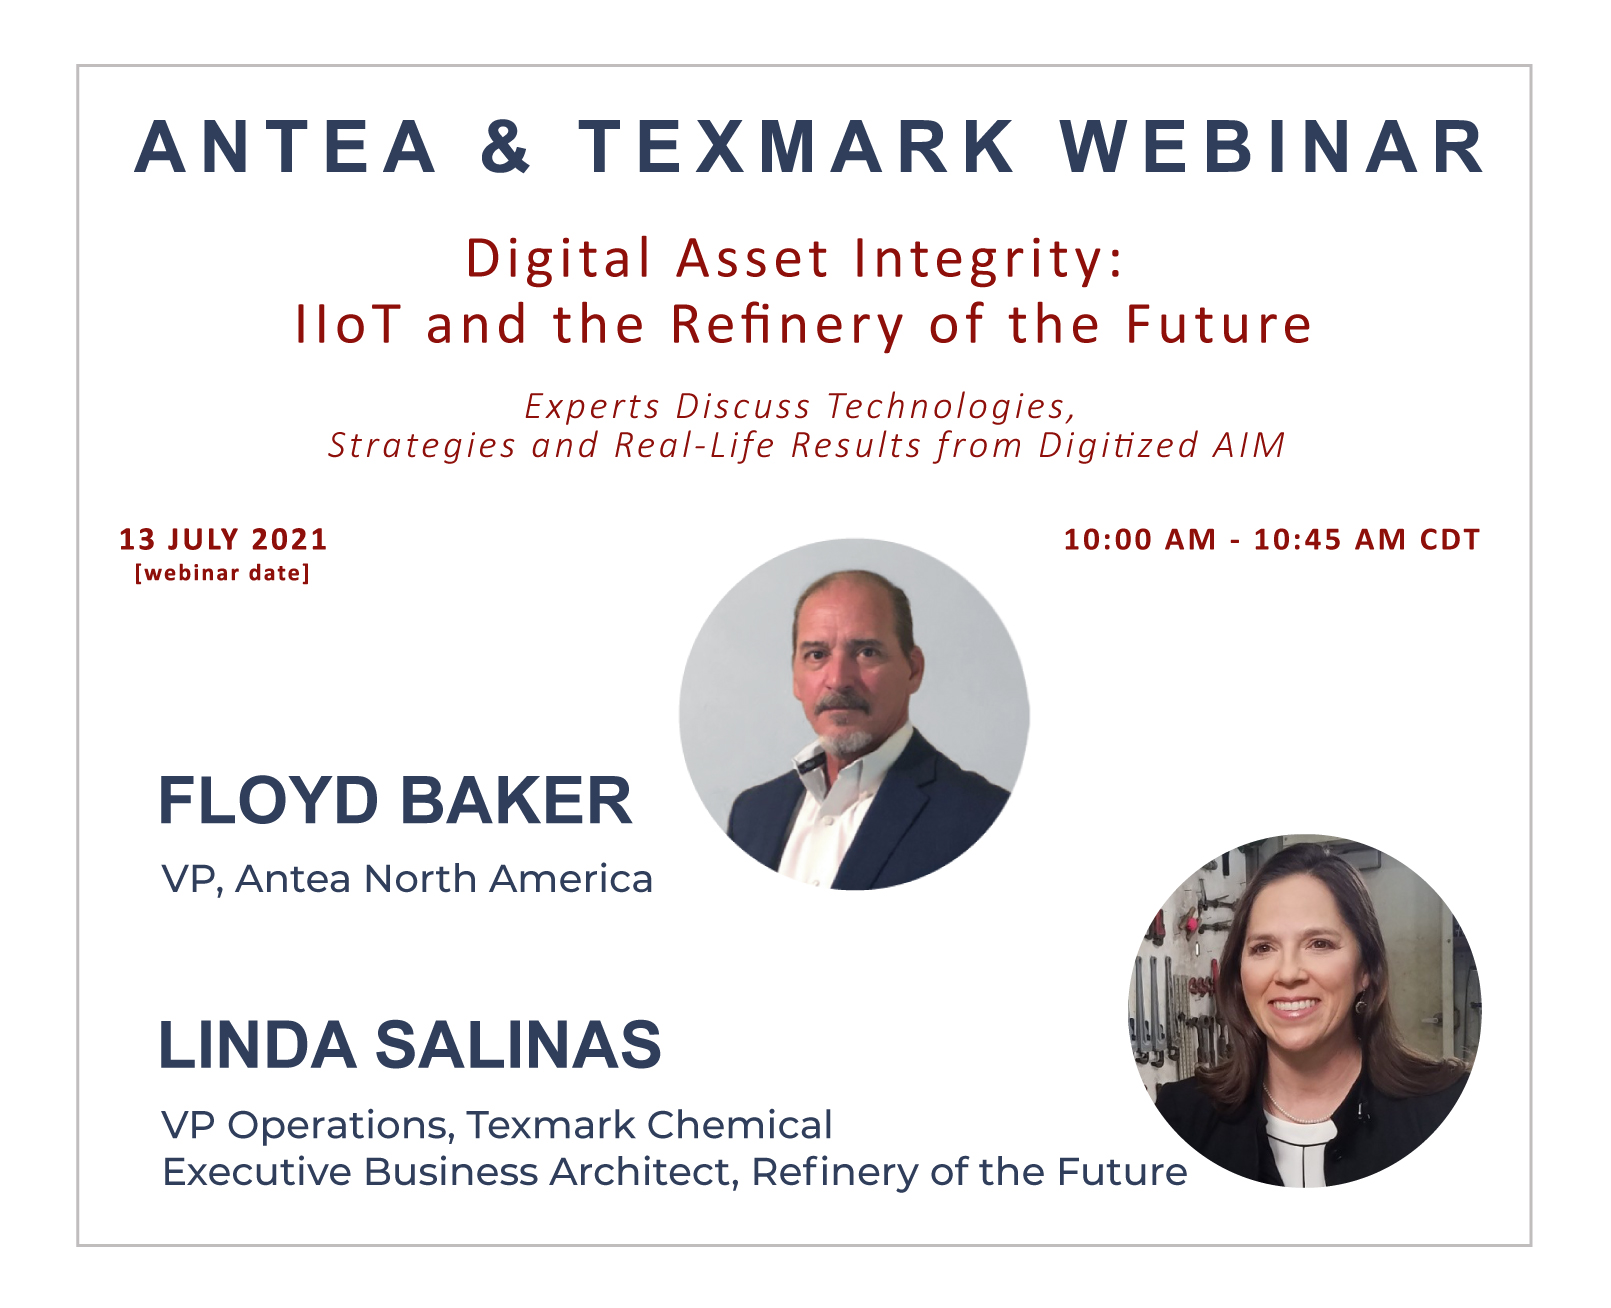 Graphic banner depicting biographical images and text details of the Digital Asset Integrity: IIoT and Refinery of the Future asset integrity management webinar.